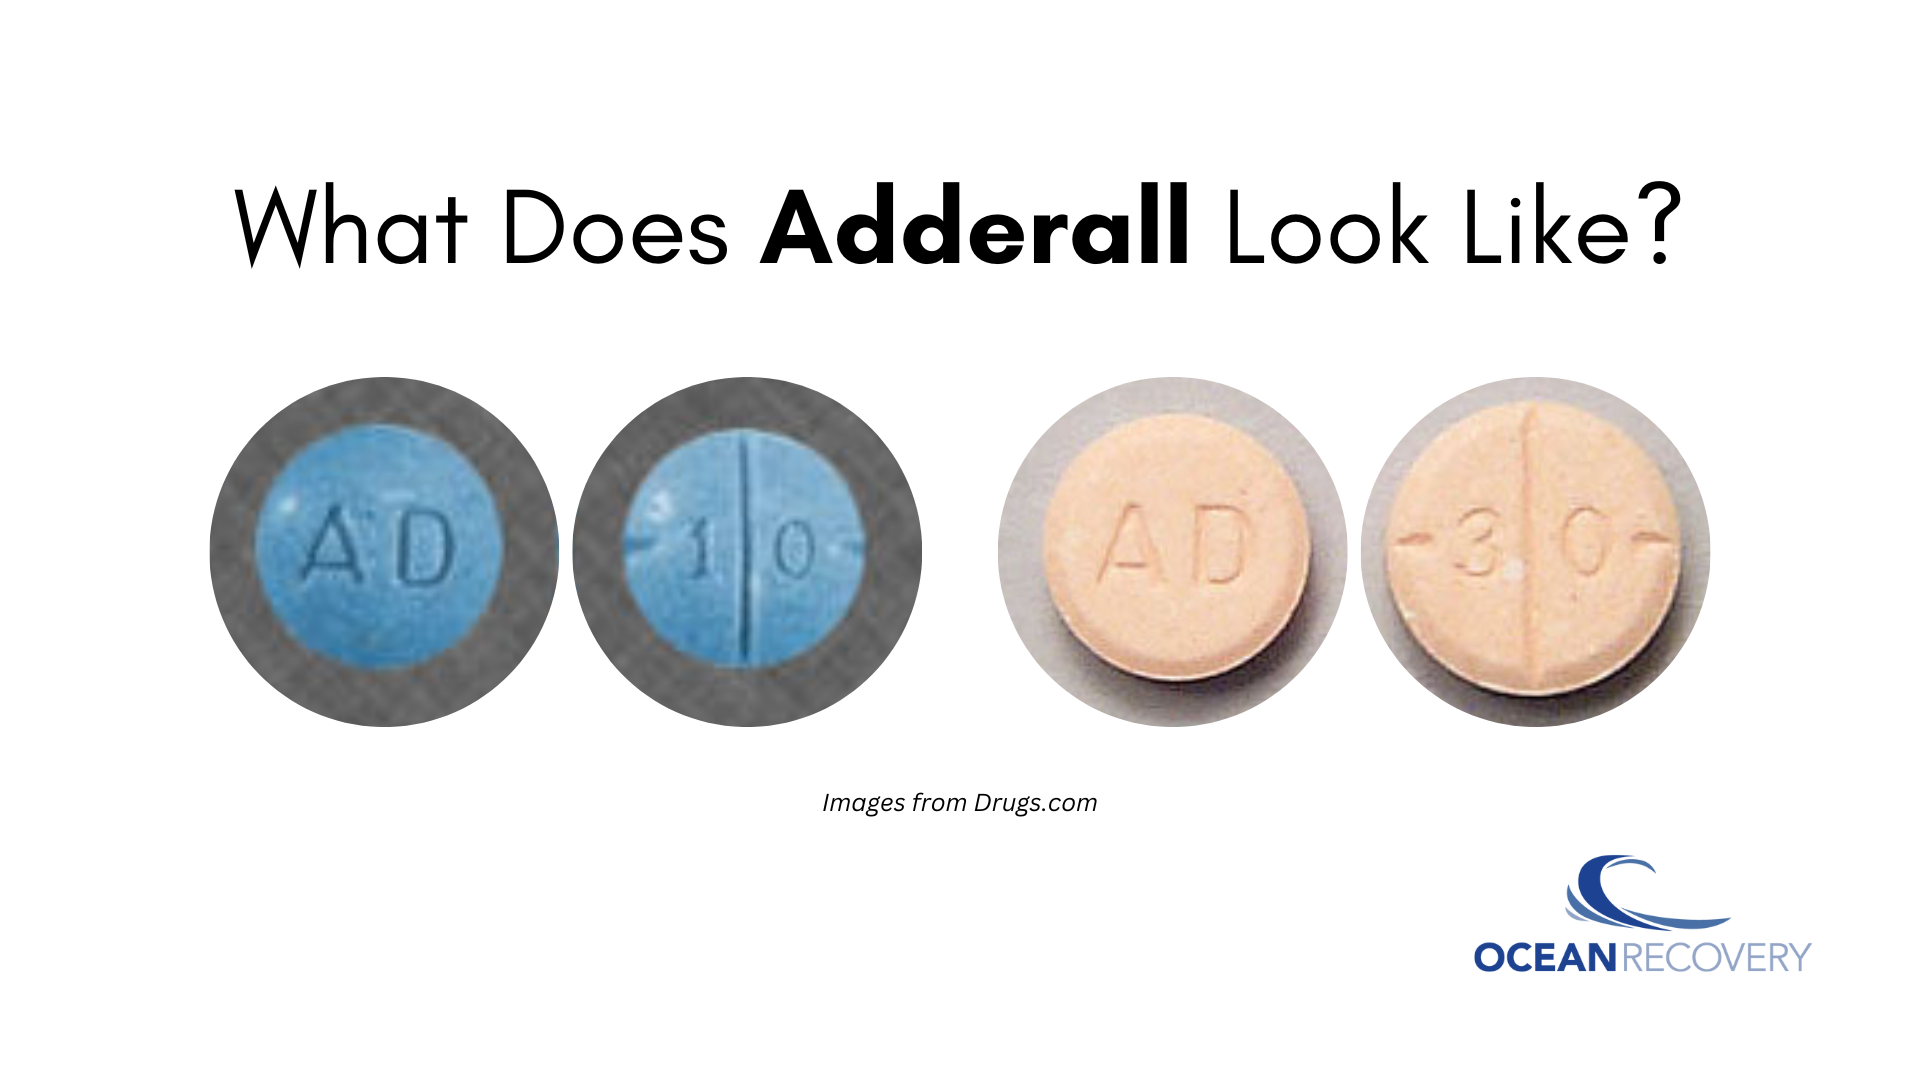 Modafinil Vs Adderall: Which Is Better?